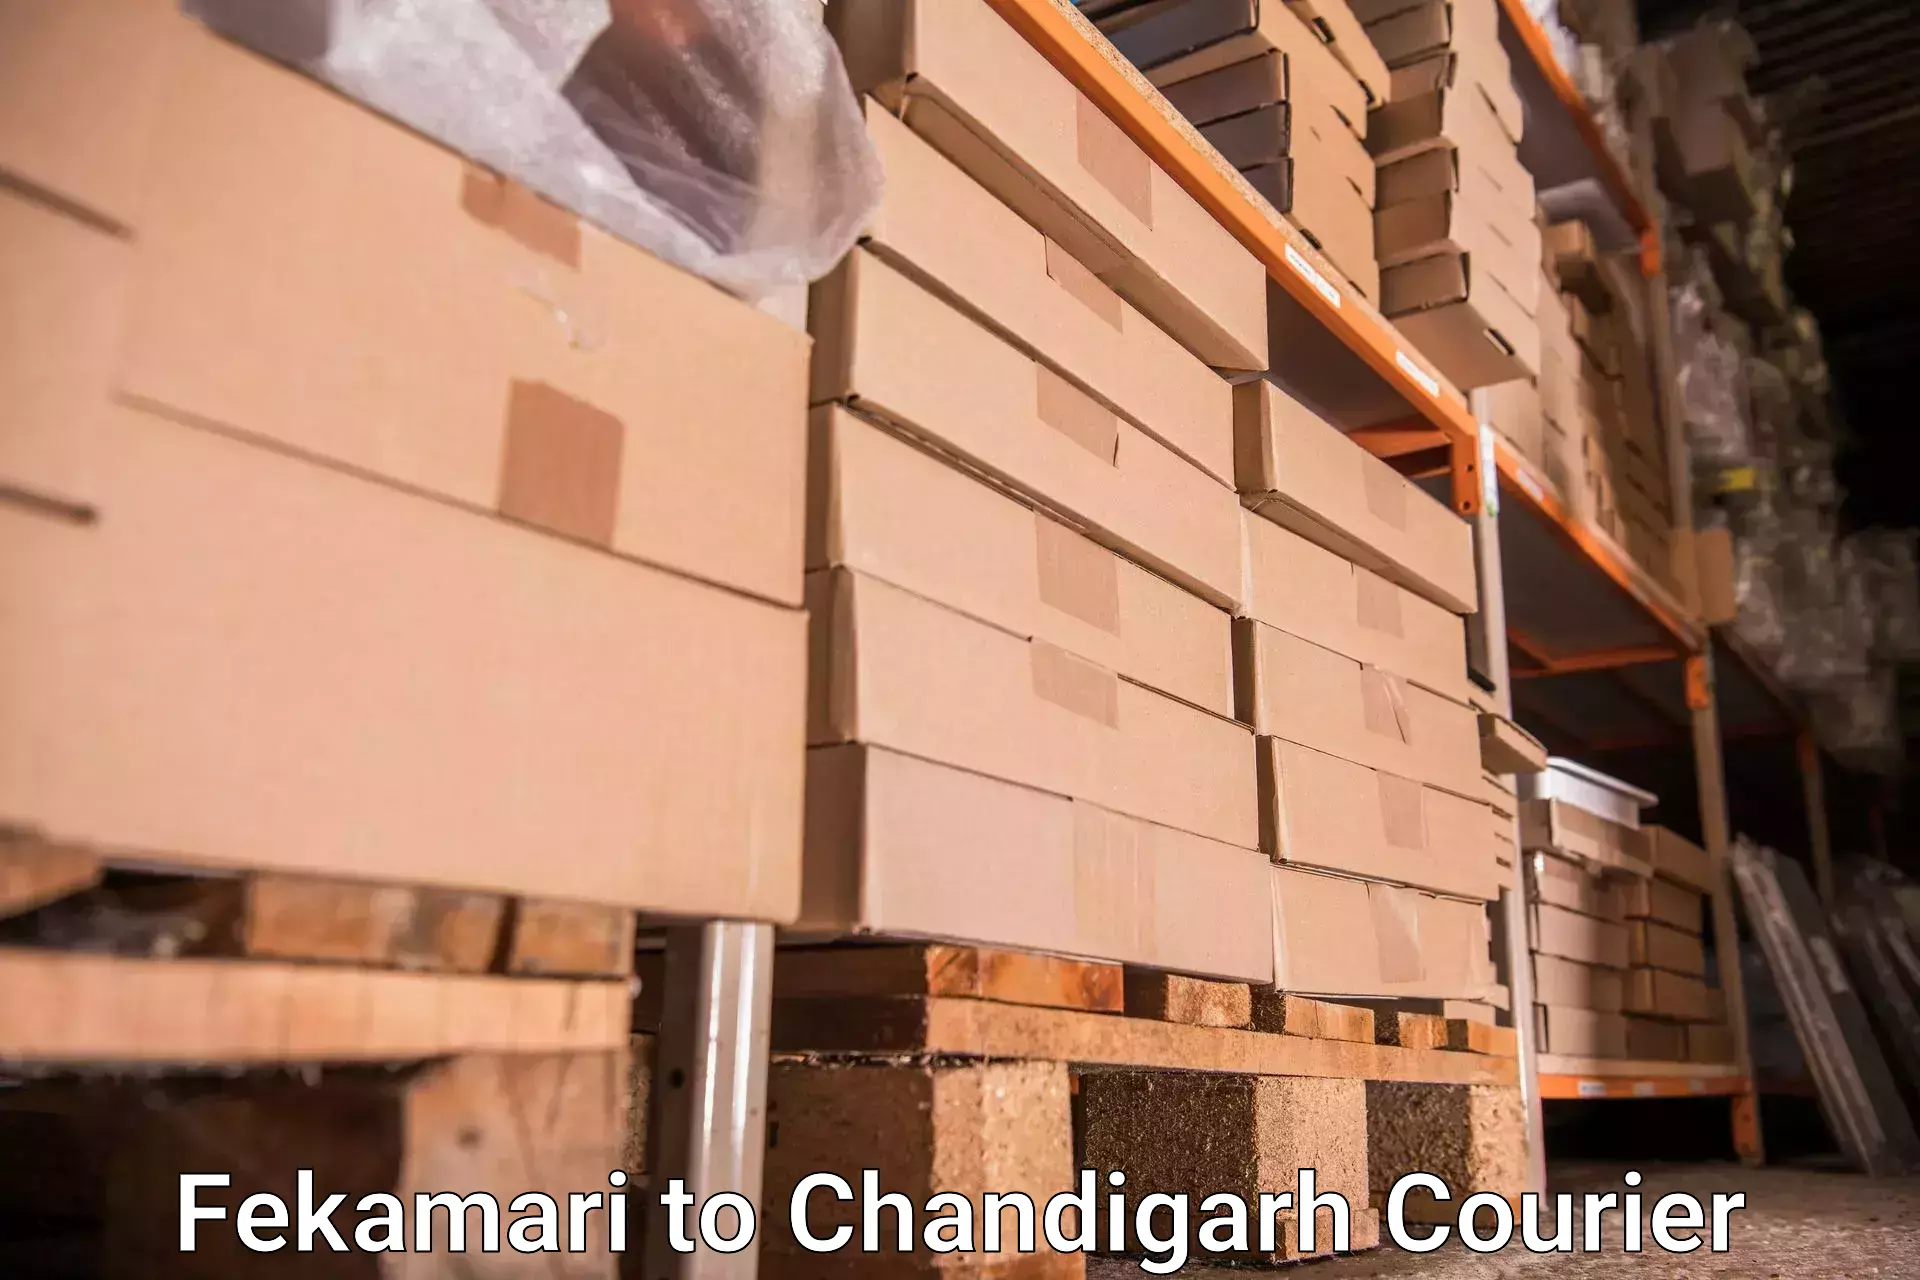 Baggage delivery technology Fekamari to Chandigarh